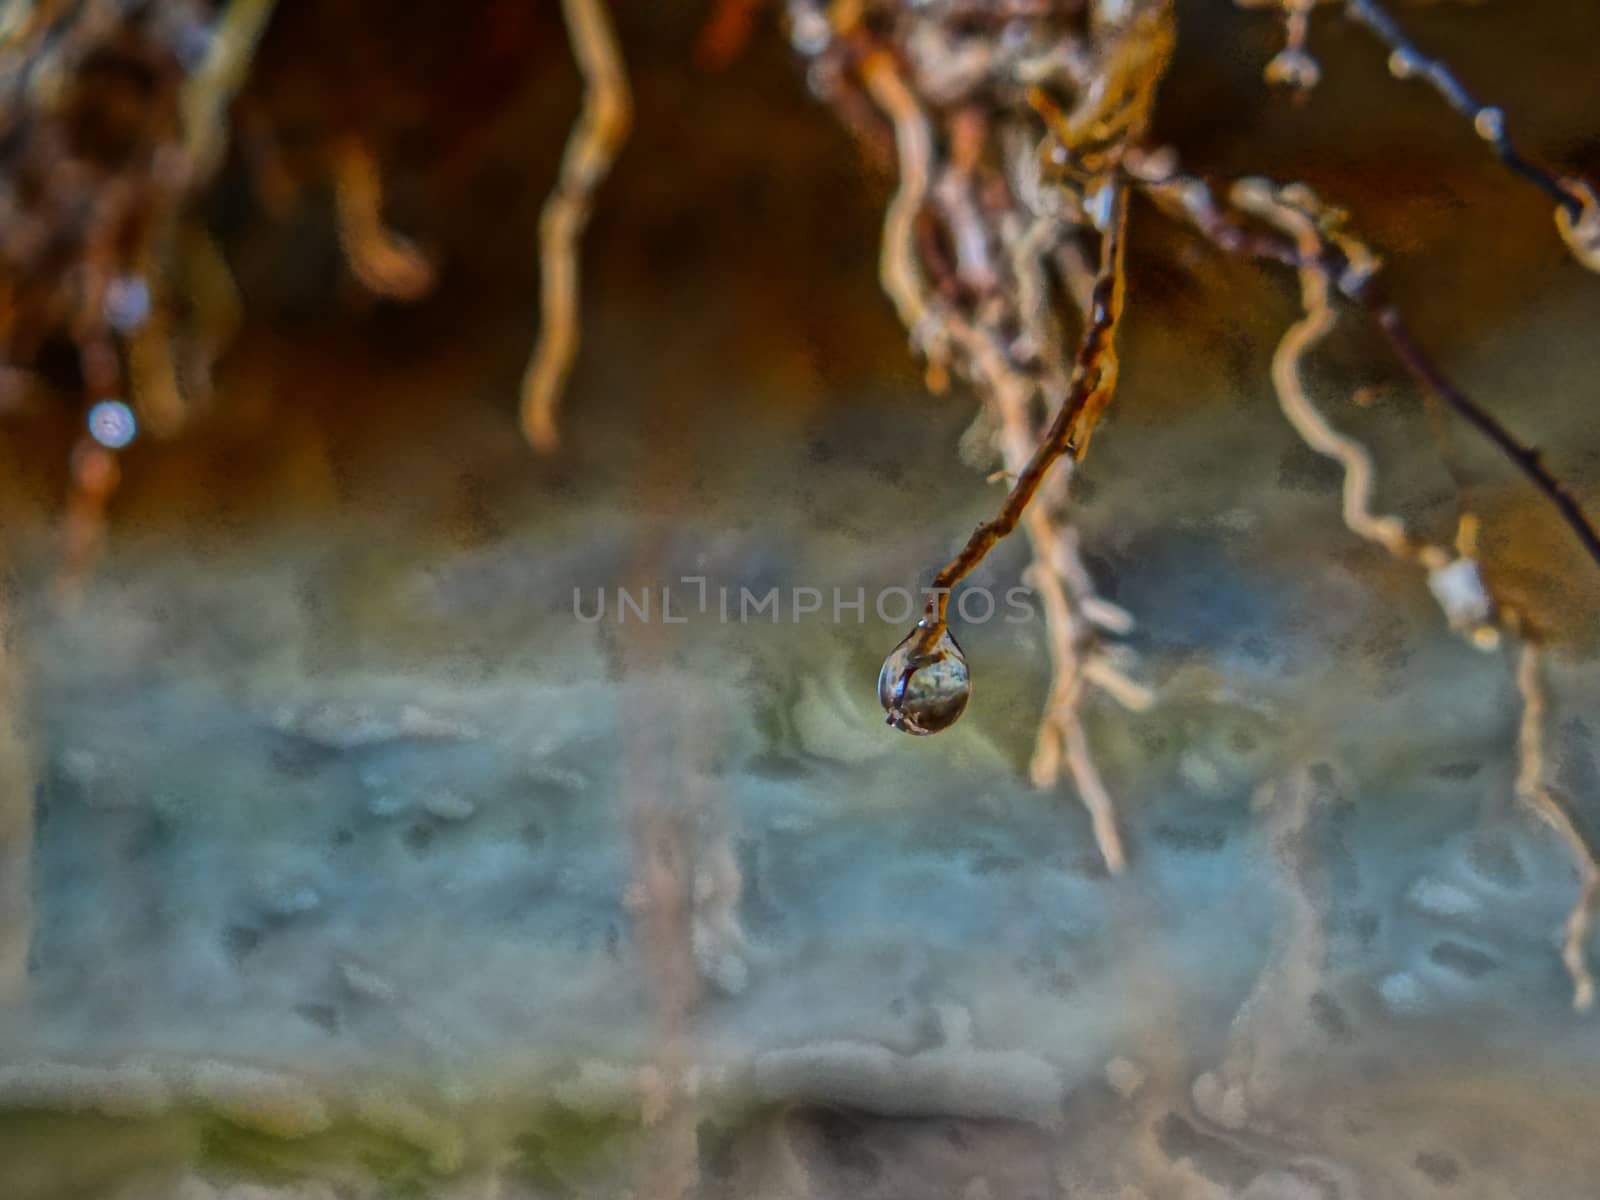 A water drop falling down on a single root in front of a blurry background.